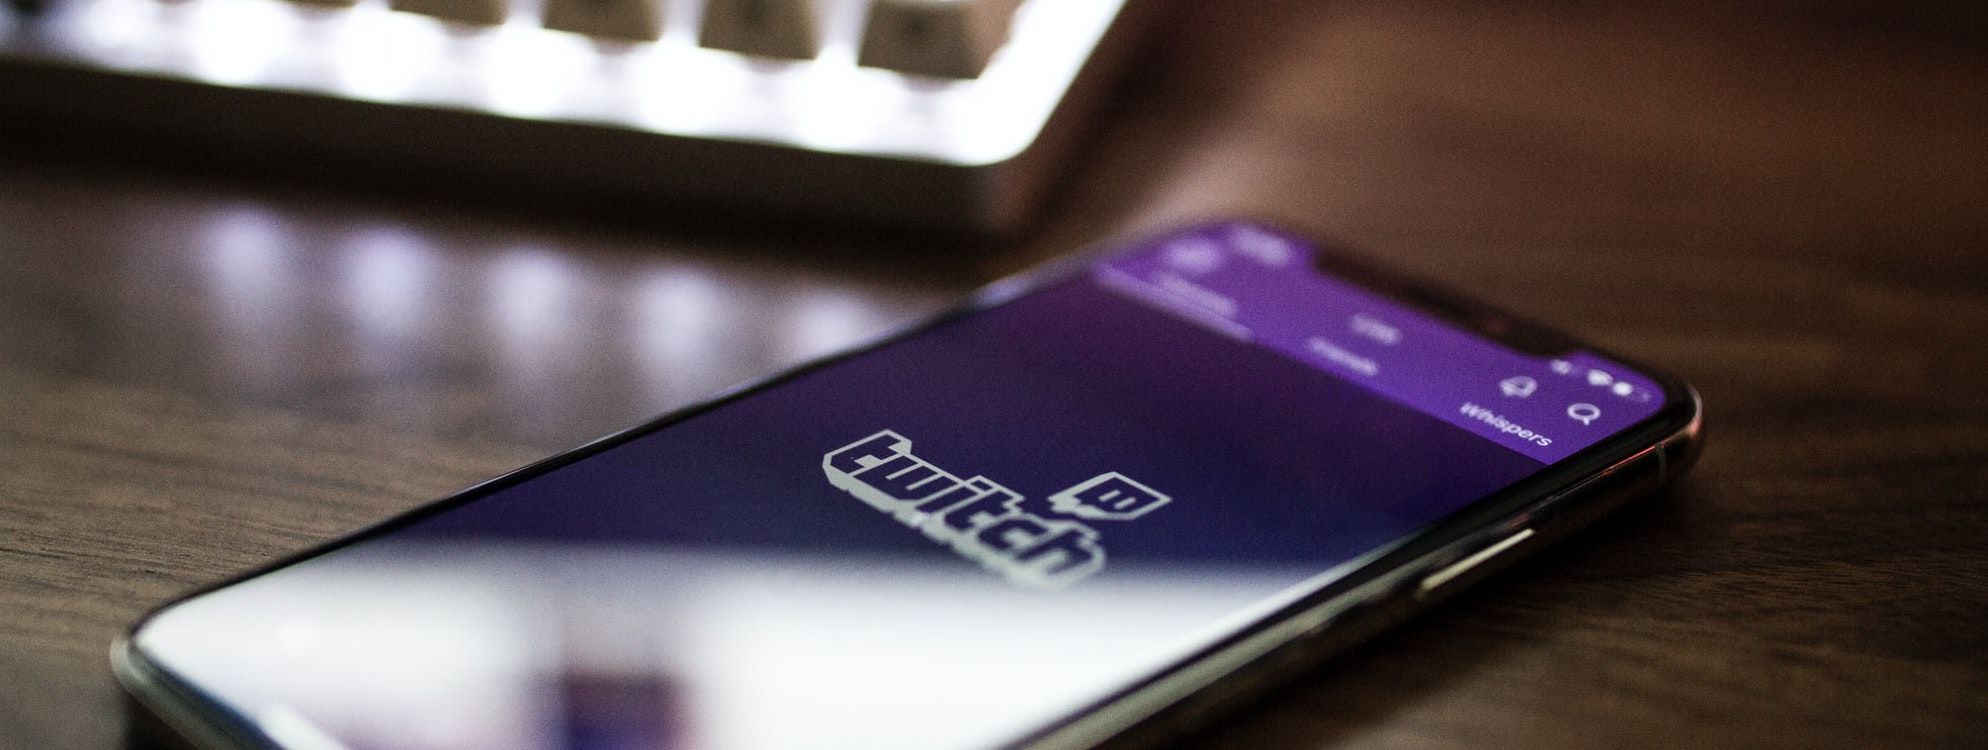 Sponsored content on Twitch draws 23% higher engagement amid pandemic precautions